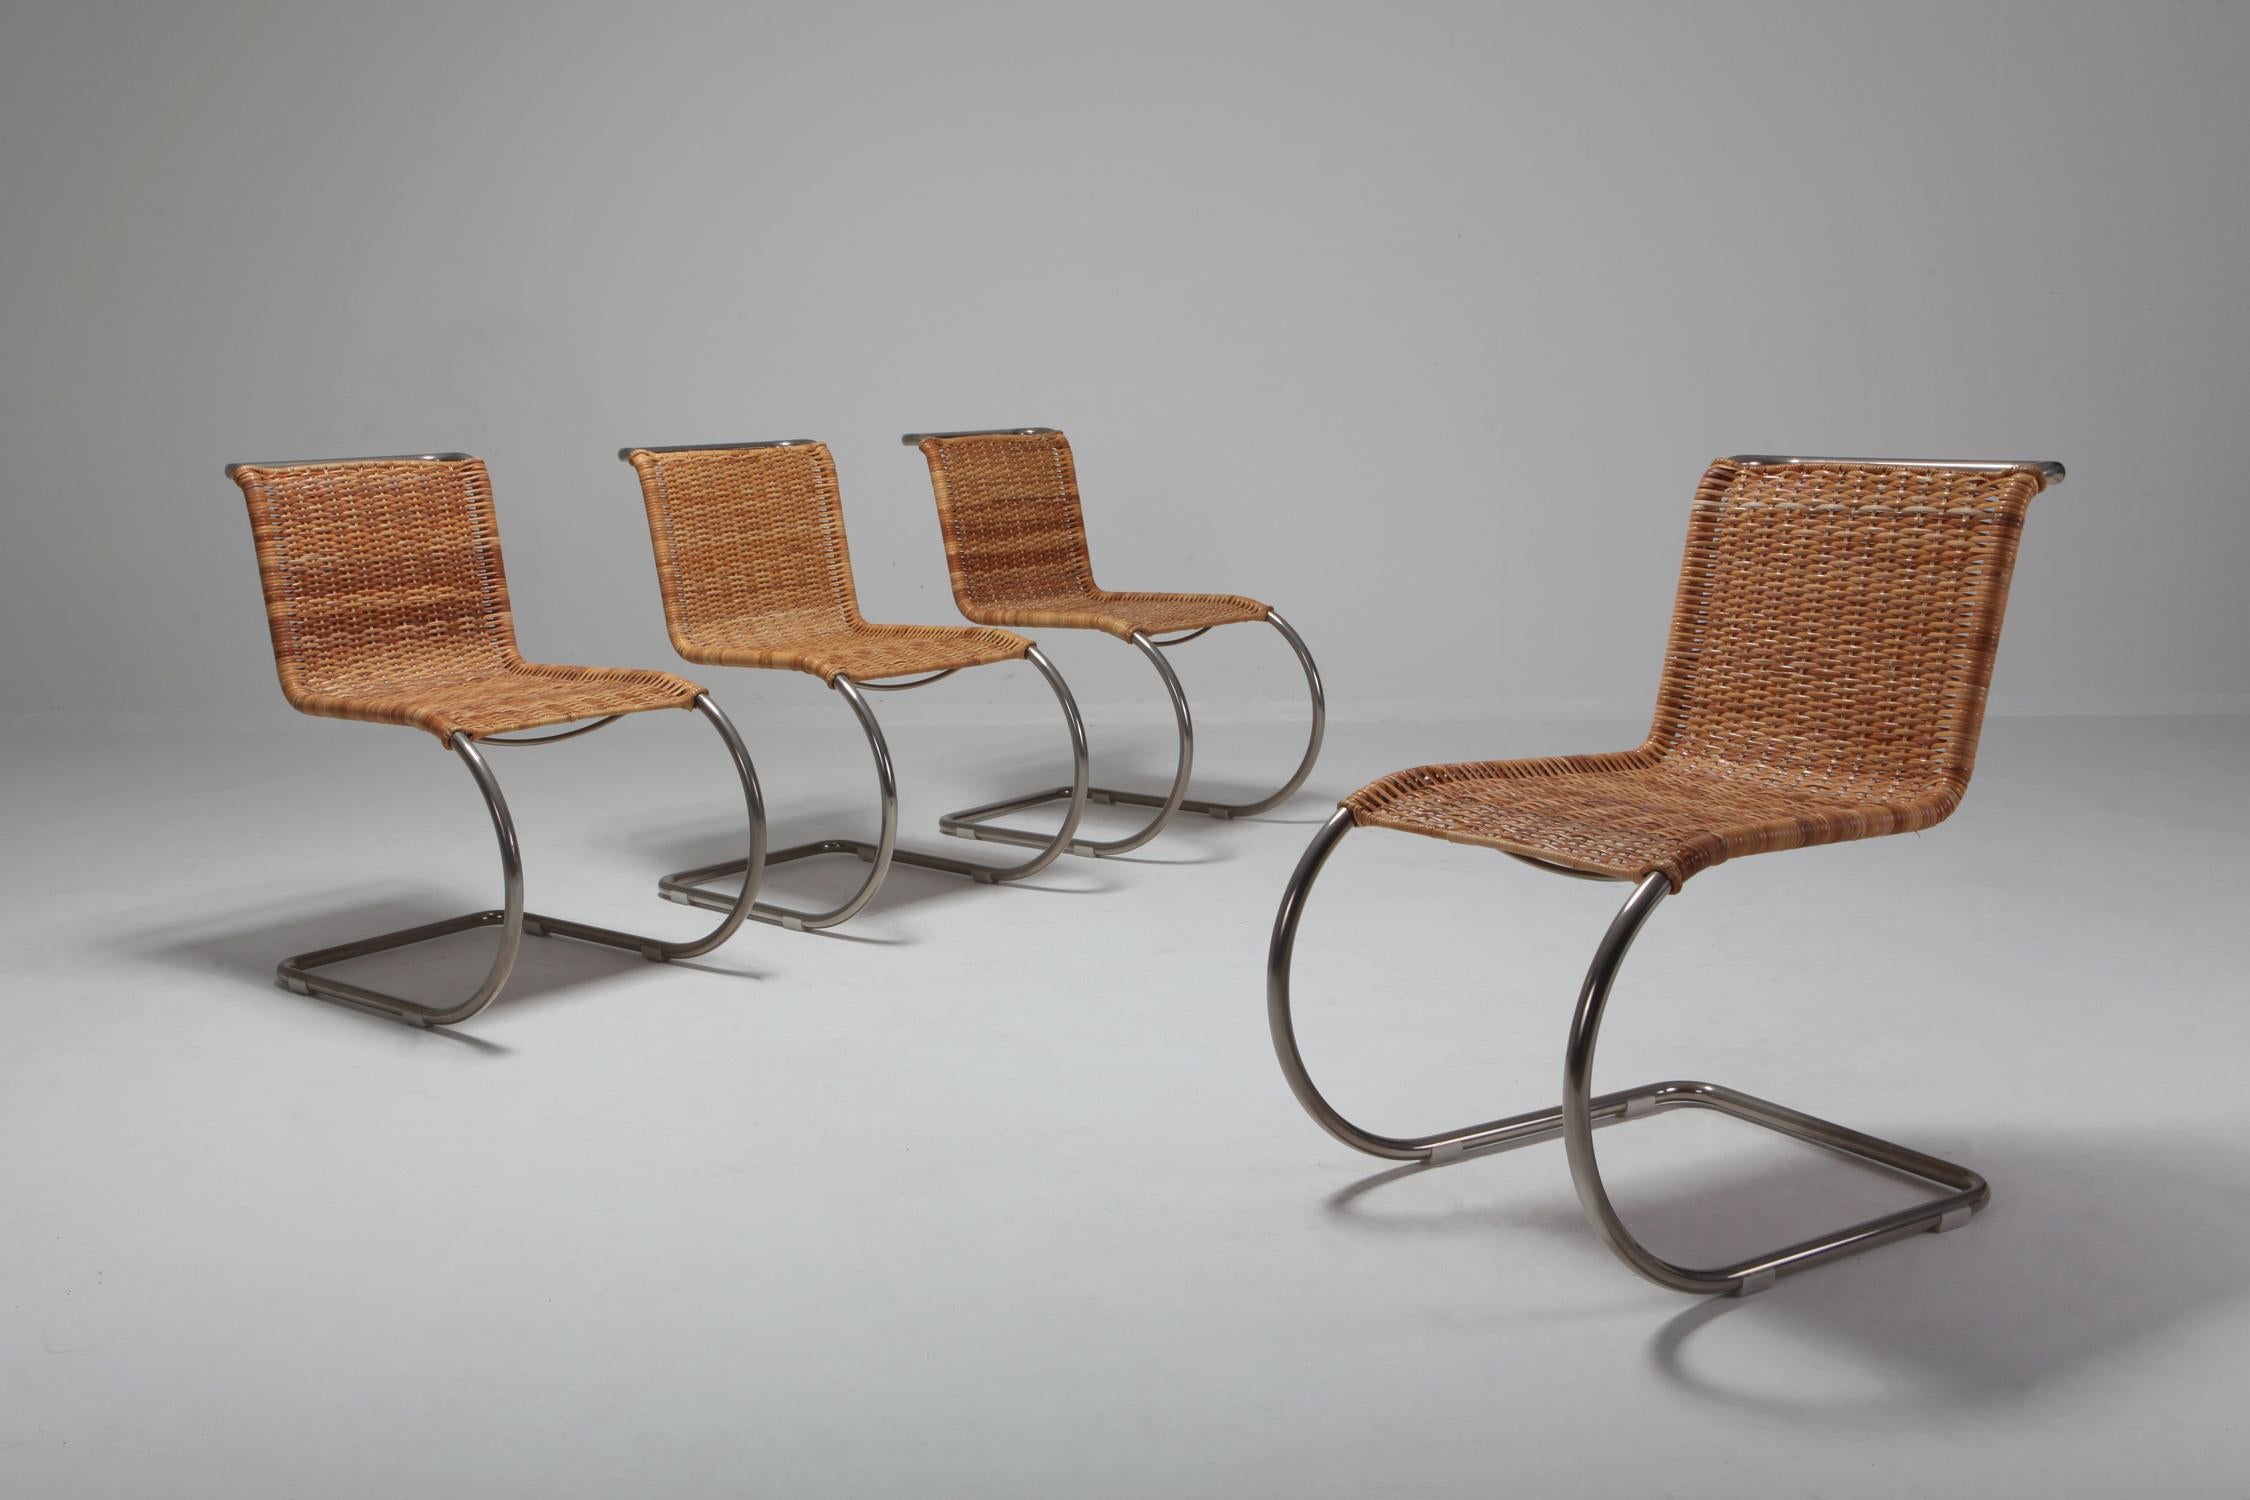 Cane Ludwig Mies van der Rohe Set of Four B42 Weissenhof Chairs by Tecta